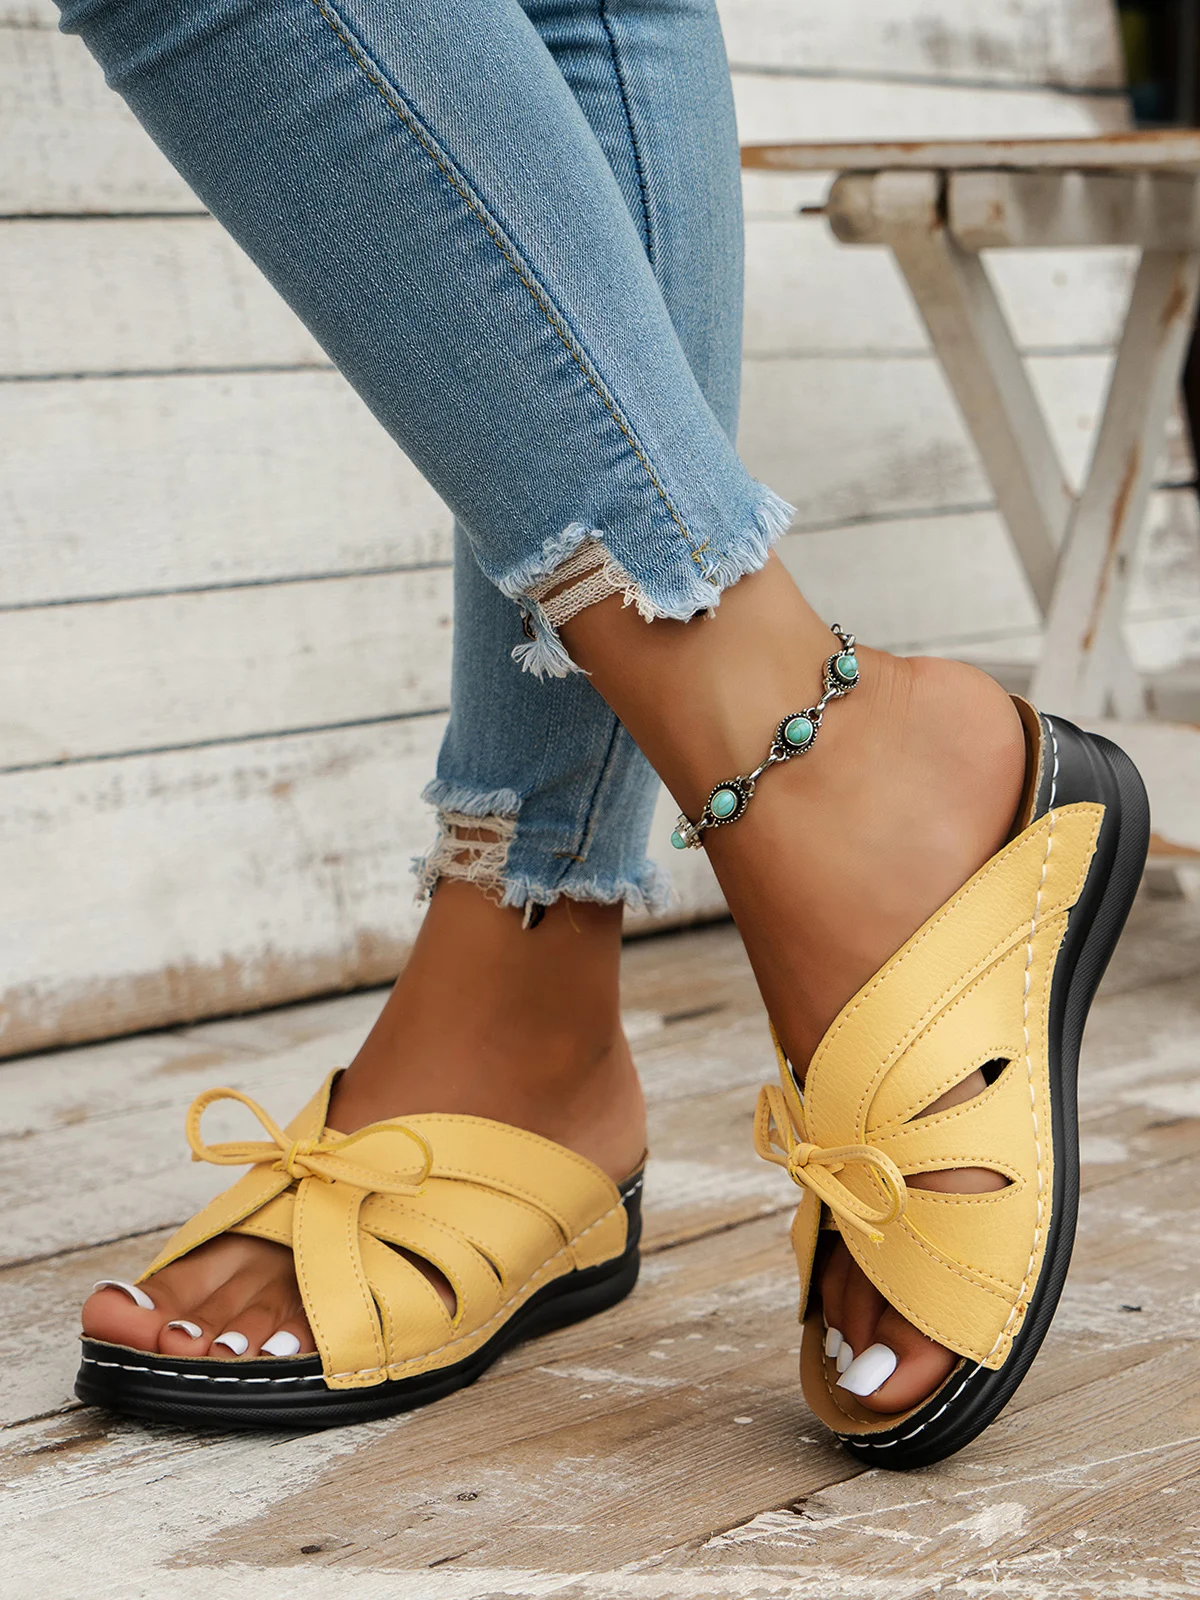 Women's Leisure Sandals Casual Bowknot Hollow out Comfy Wedge Heel Slide Toe-revealing Sandals